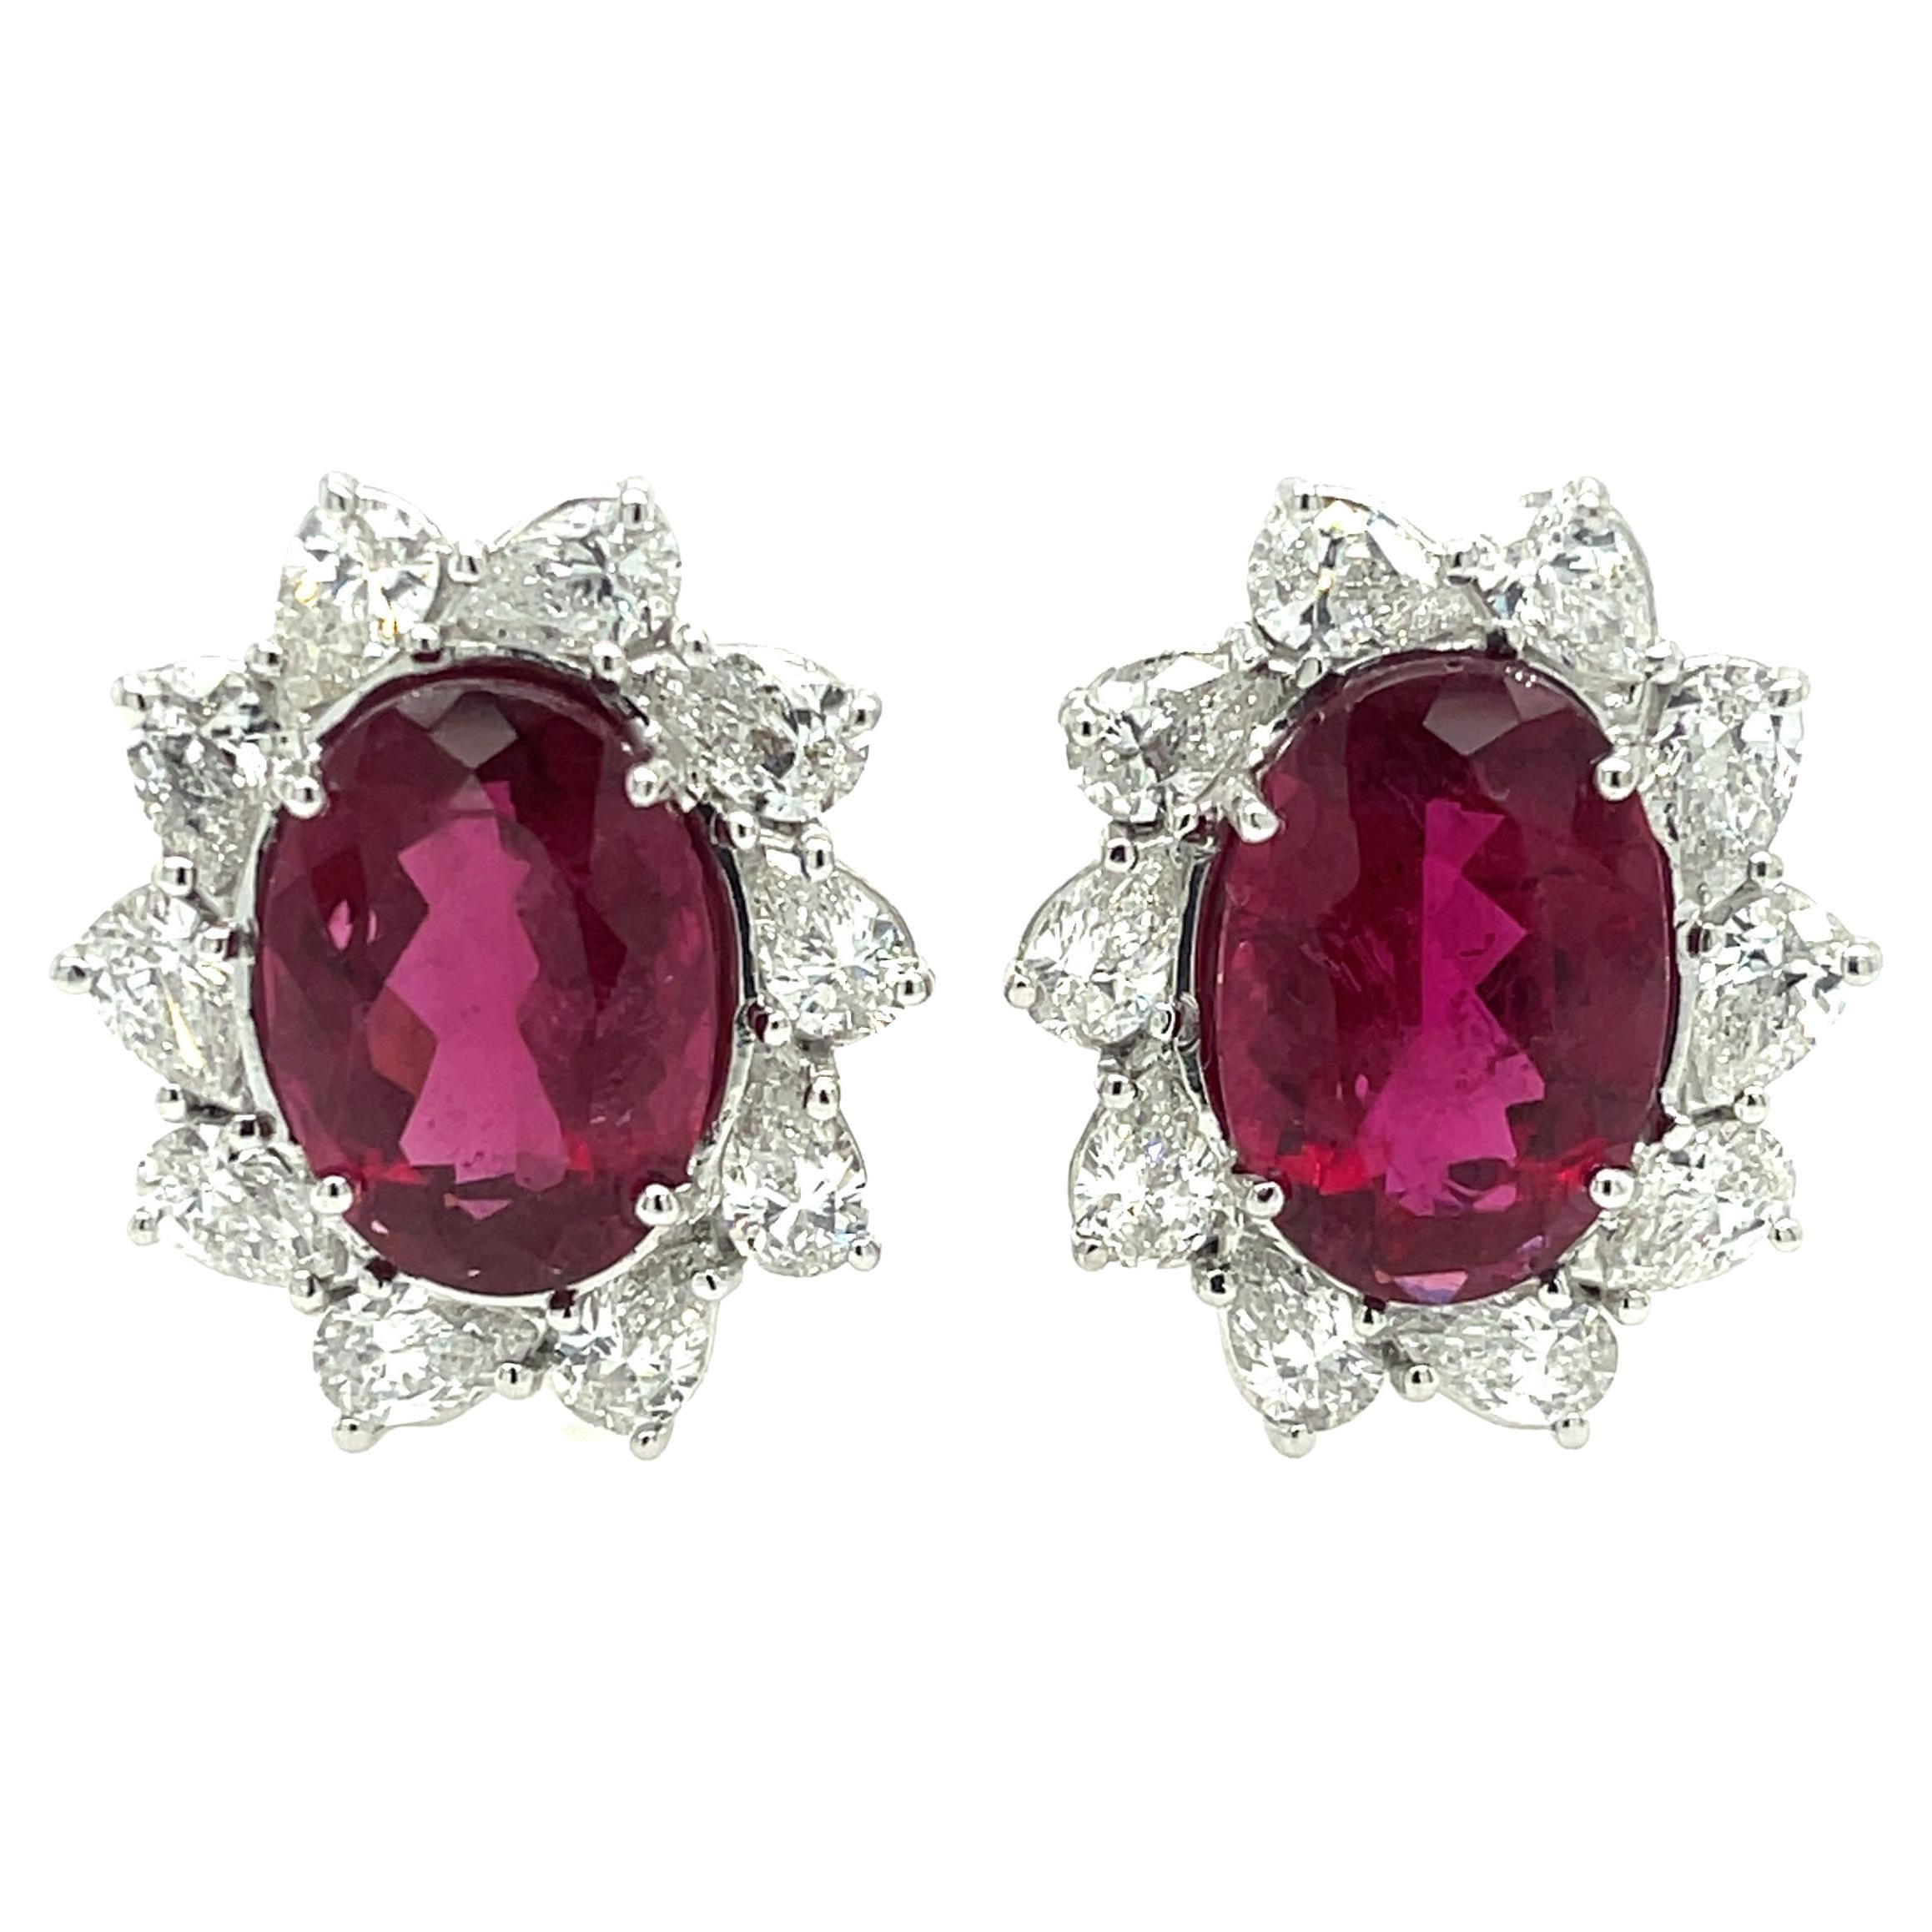 Rubellite '12.17ctw' and Diamond '3.83ctw' Earrings in 18k White Gold